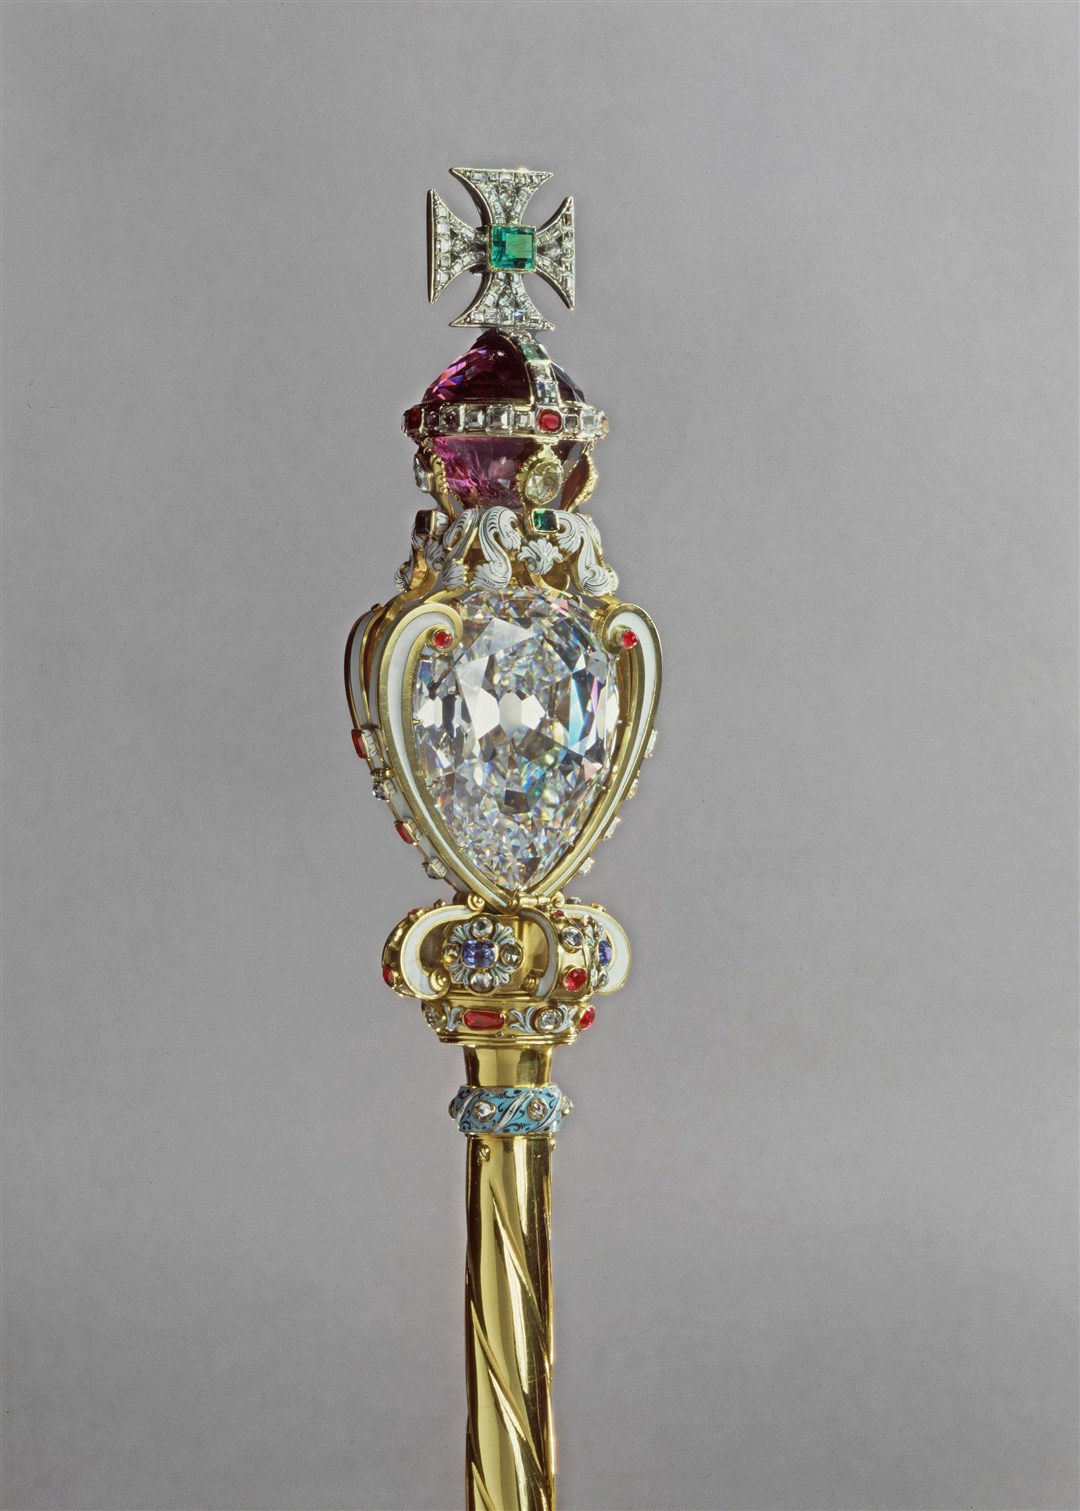 The Cullinan I diamond on the top of the Sovereign’s Sceptre with Cross (Royal Collection Trust/HM King Charles III/PA)